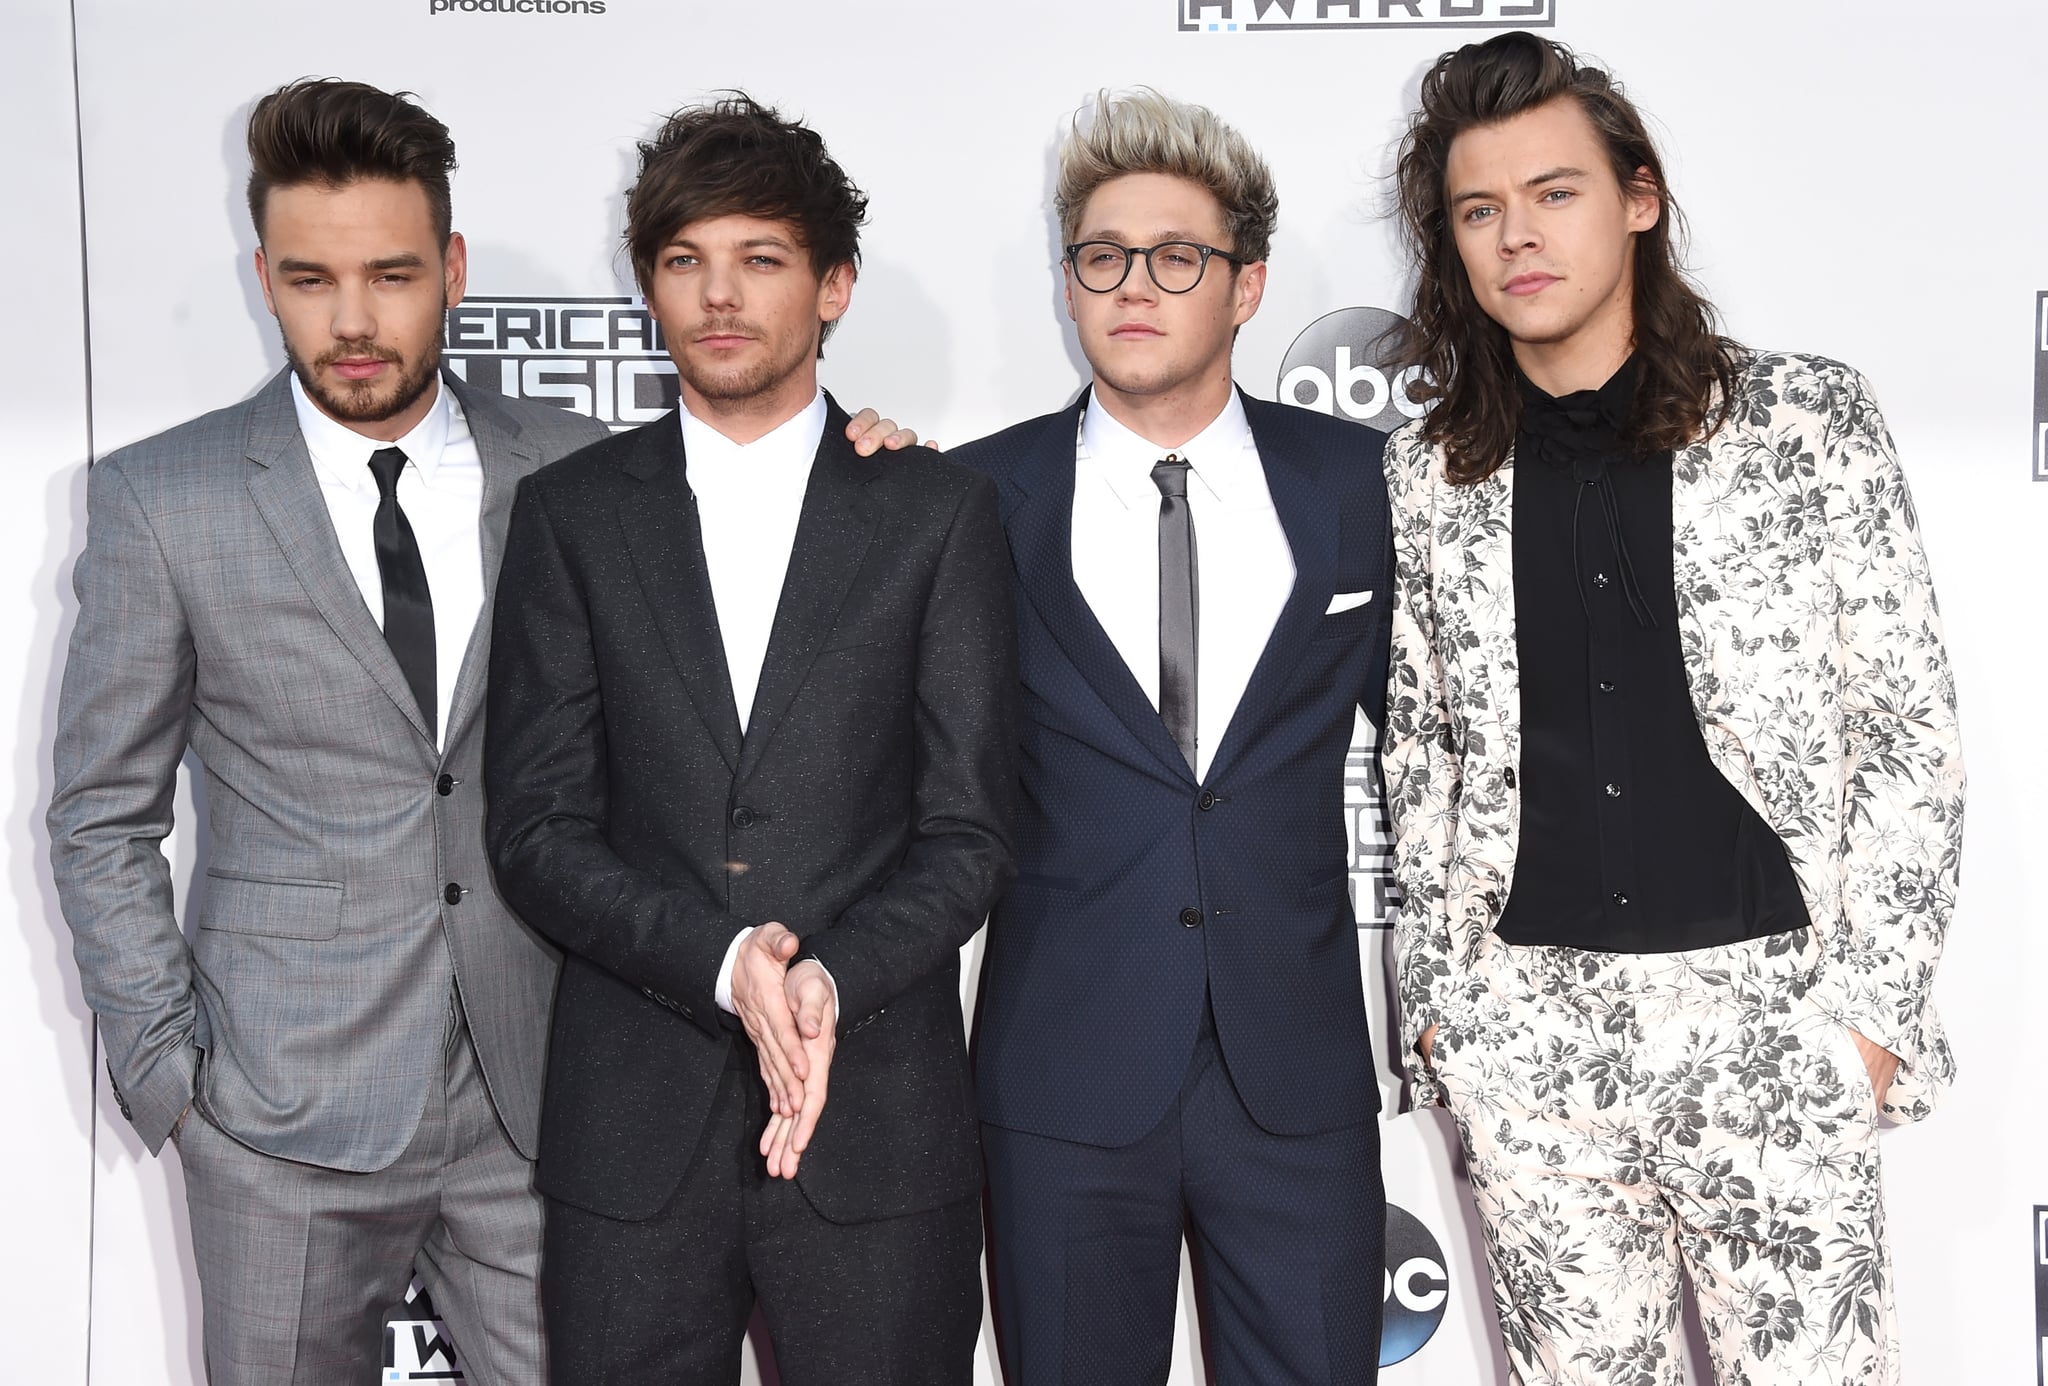 One Direction At The American Music Awards In 15 Celebrate 9 Years Of One Direction With 99 Of Their Best Photos Ever Popsugar Celebrity Photo